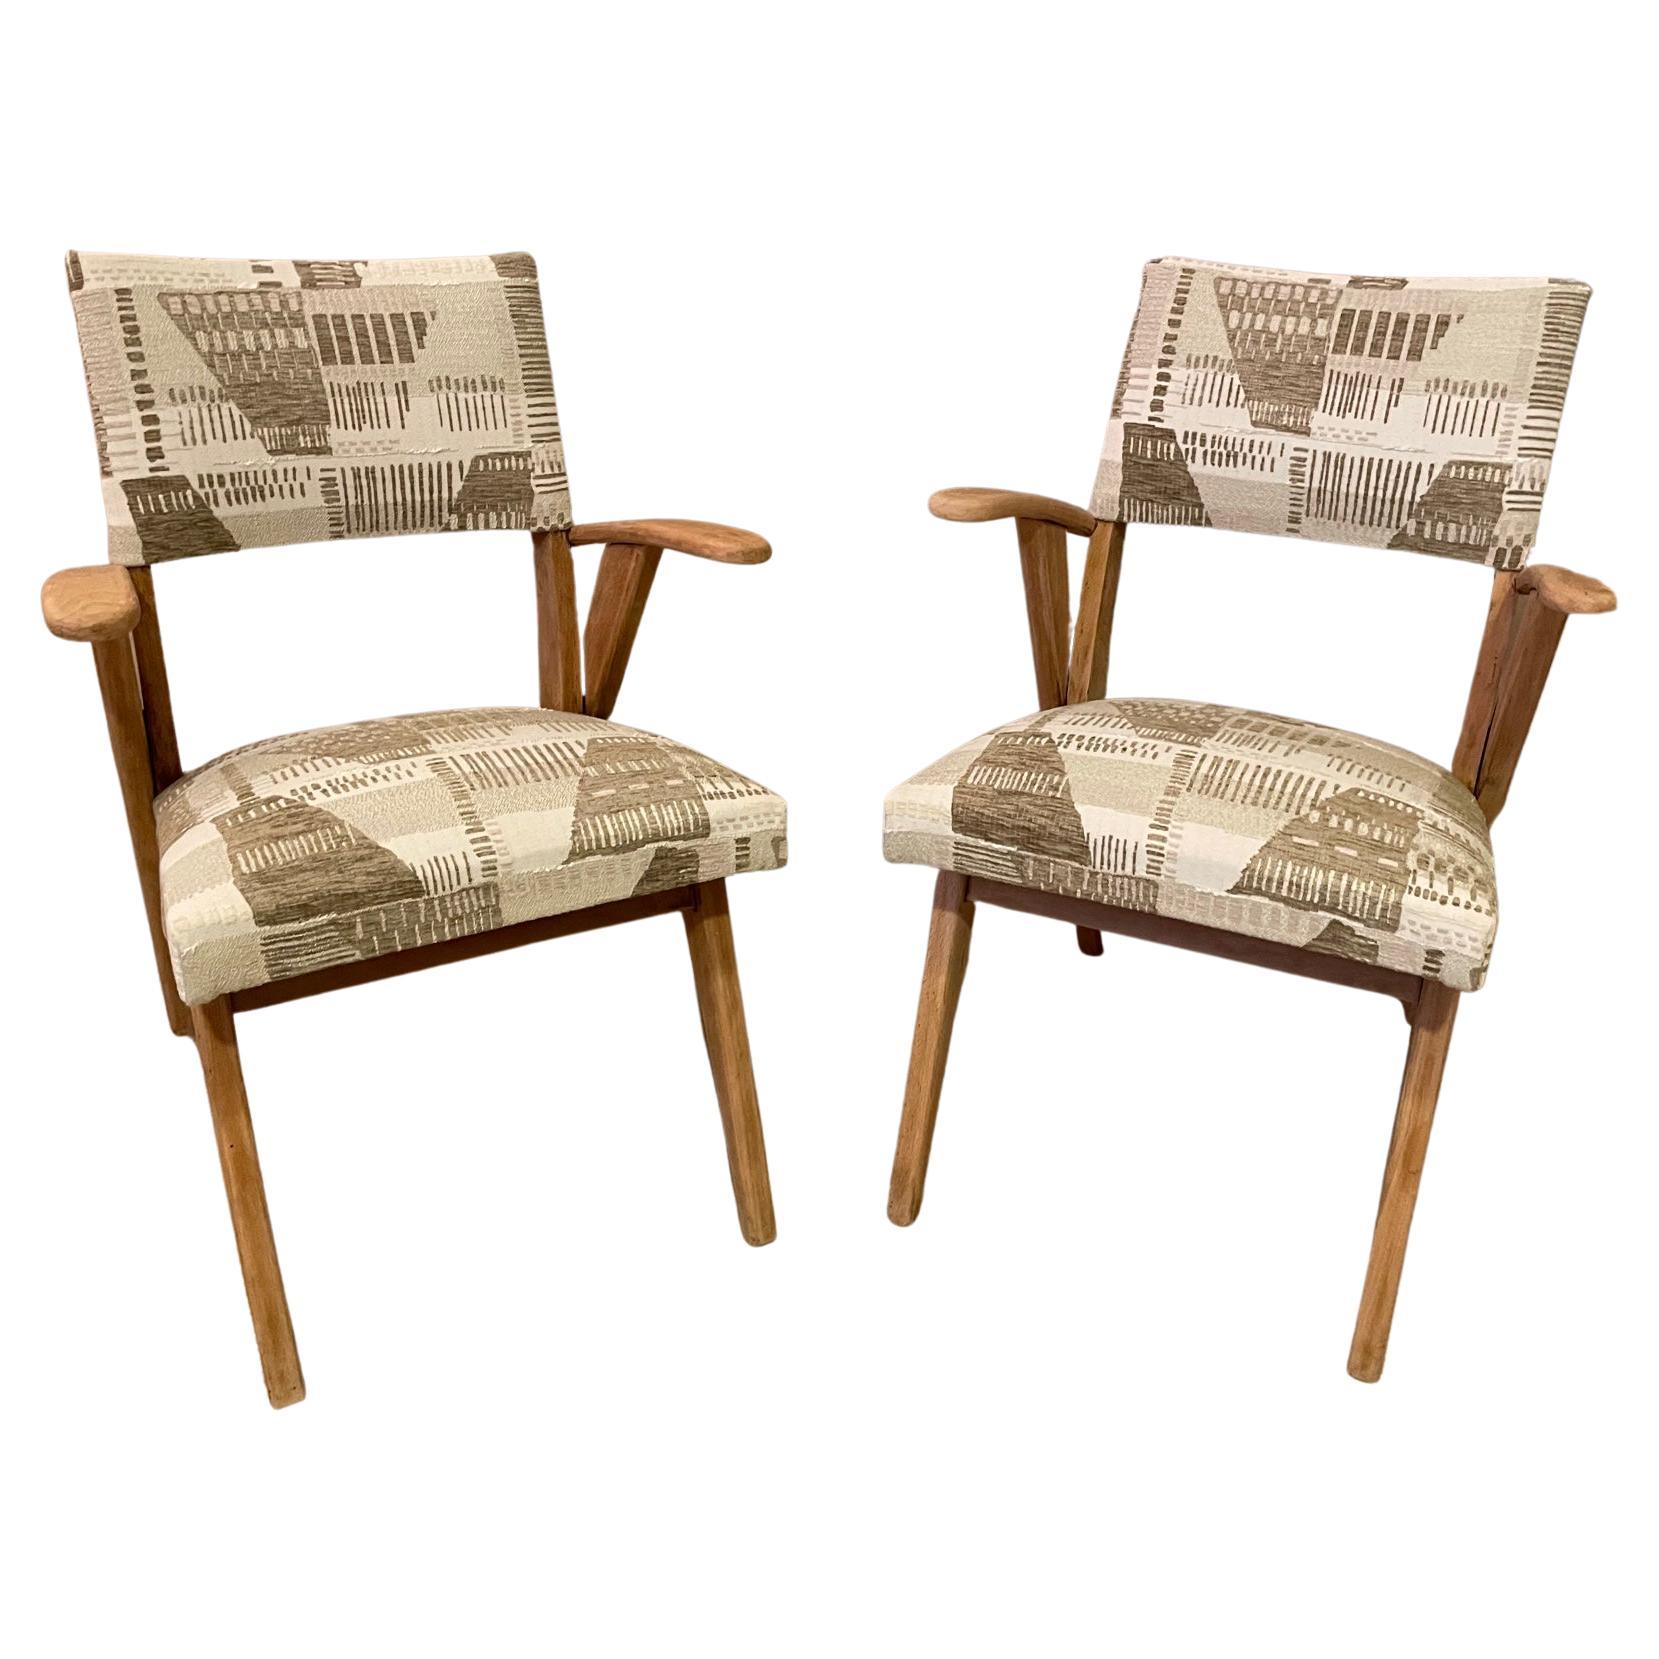 20th Century French Reupholstered Pair of Bridge Chairs For Sale